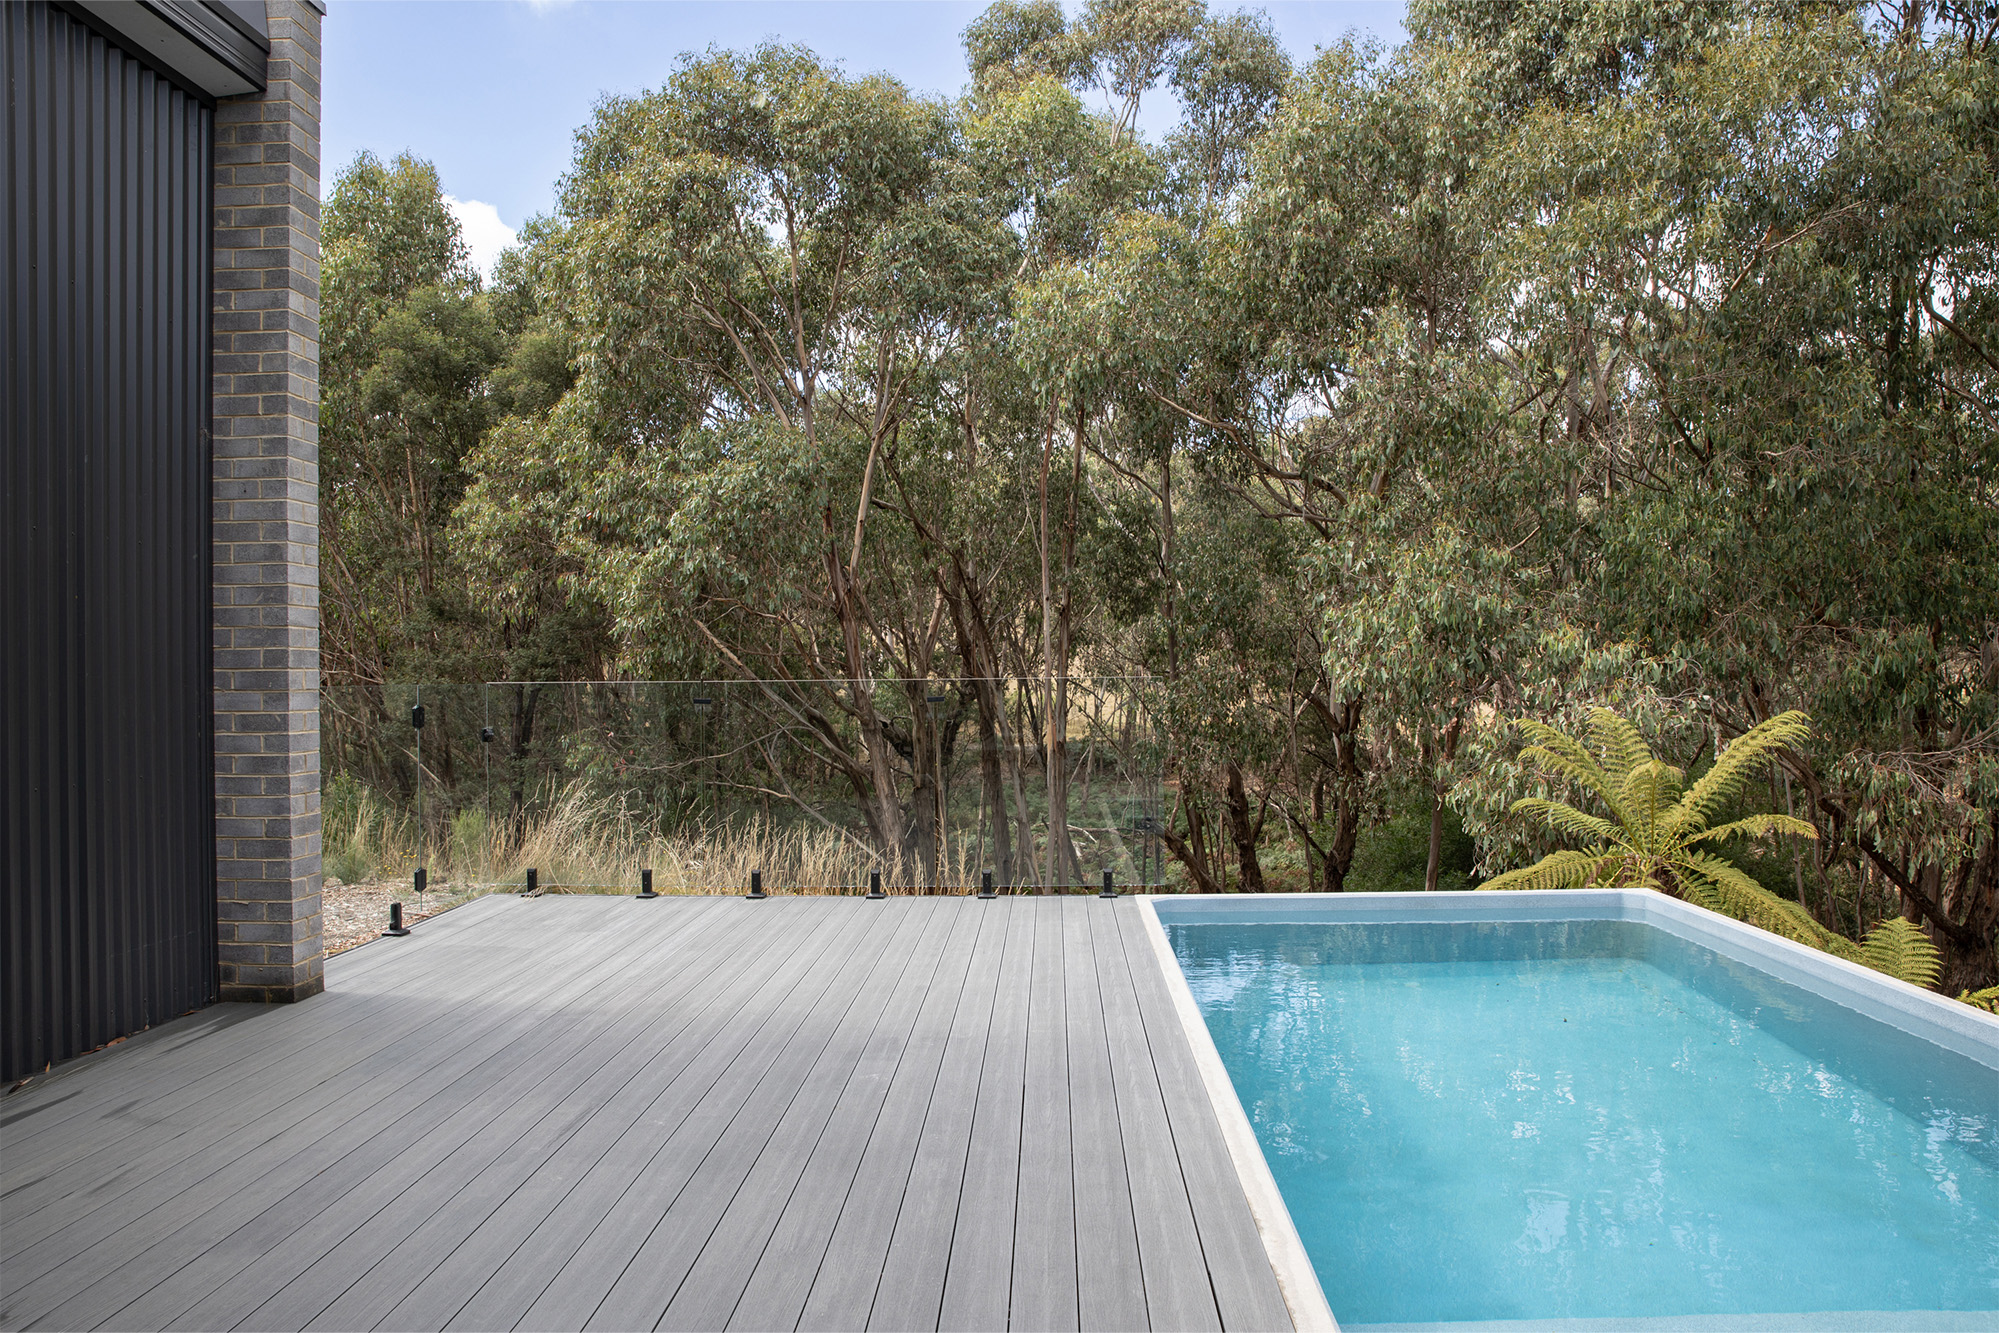 A deck with a swimming pool and trees.